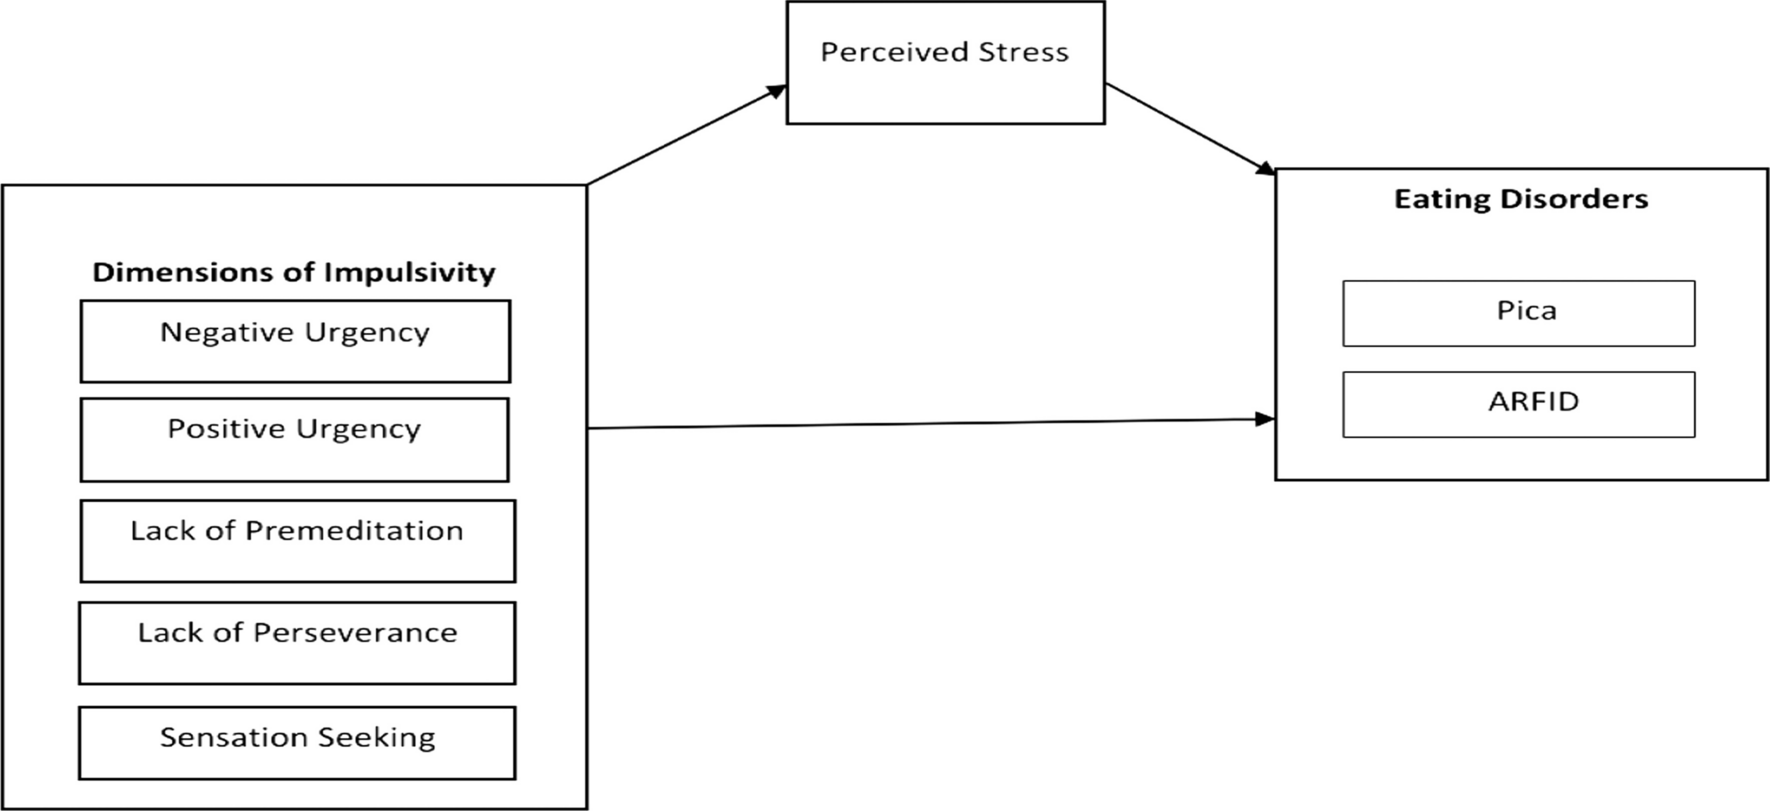 Relationship of self-reported pica and avoidant restrictive food intake disorder symptomology with dimensions of impulsivity, perceived stress among Pakistani University students